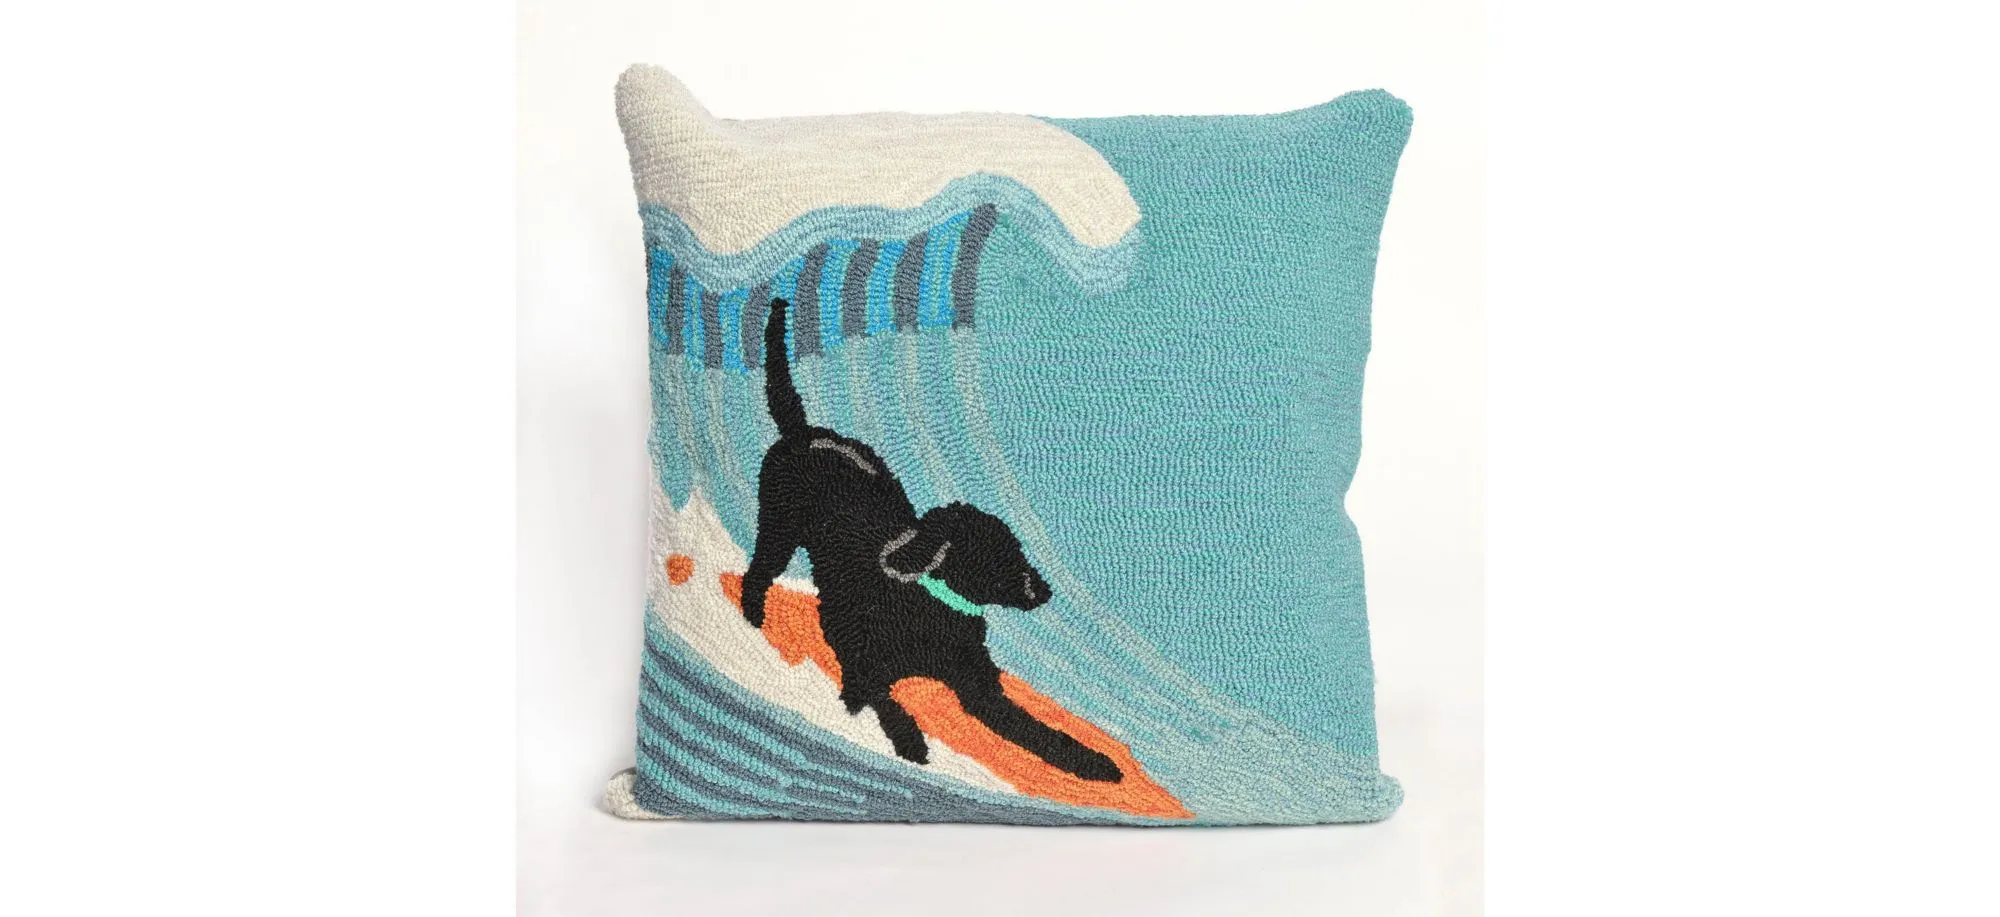 Liora Manne Frontporch Surfing Dog Pillow in Blue by Trans-Ocean Import Co Inc